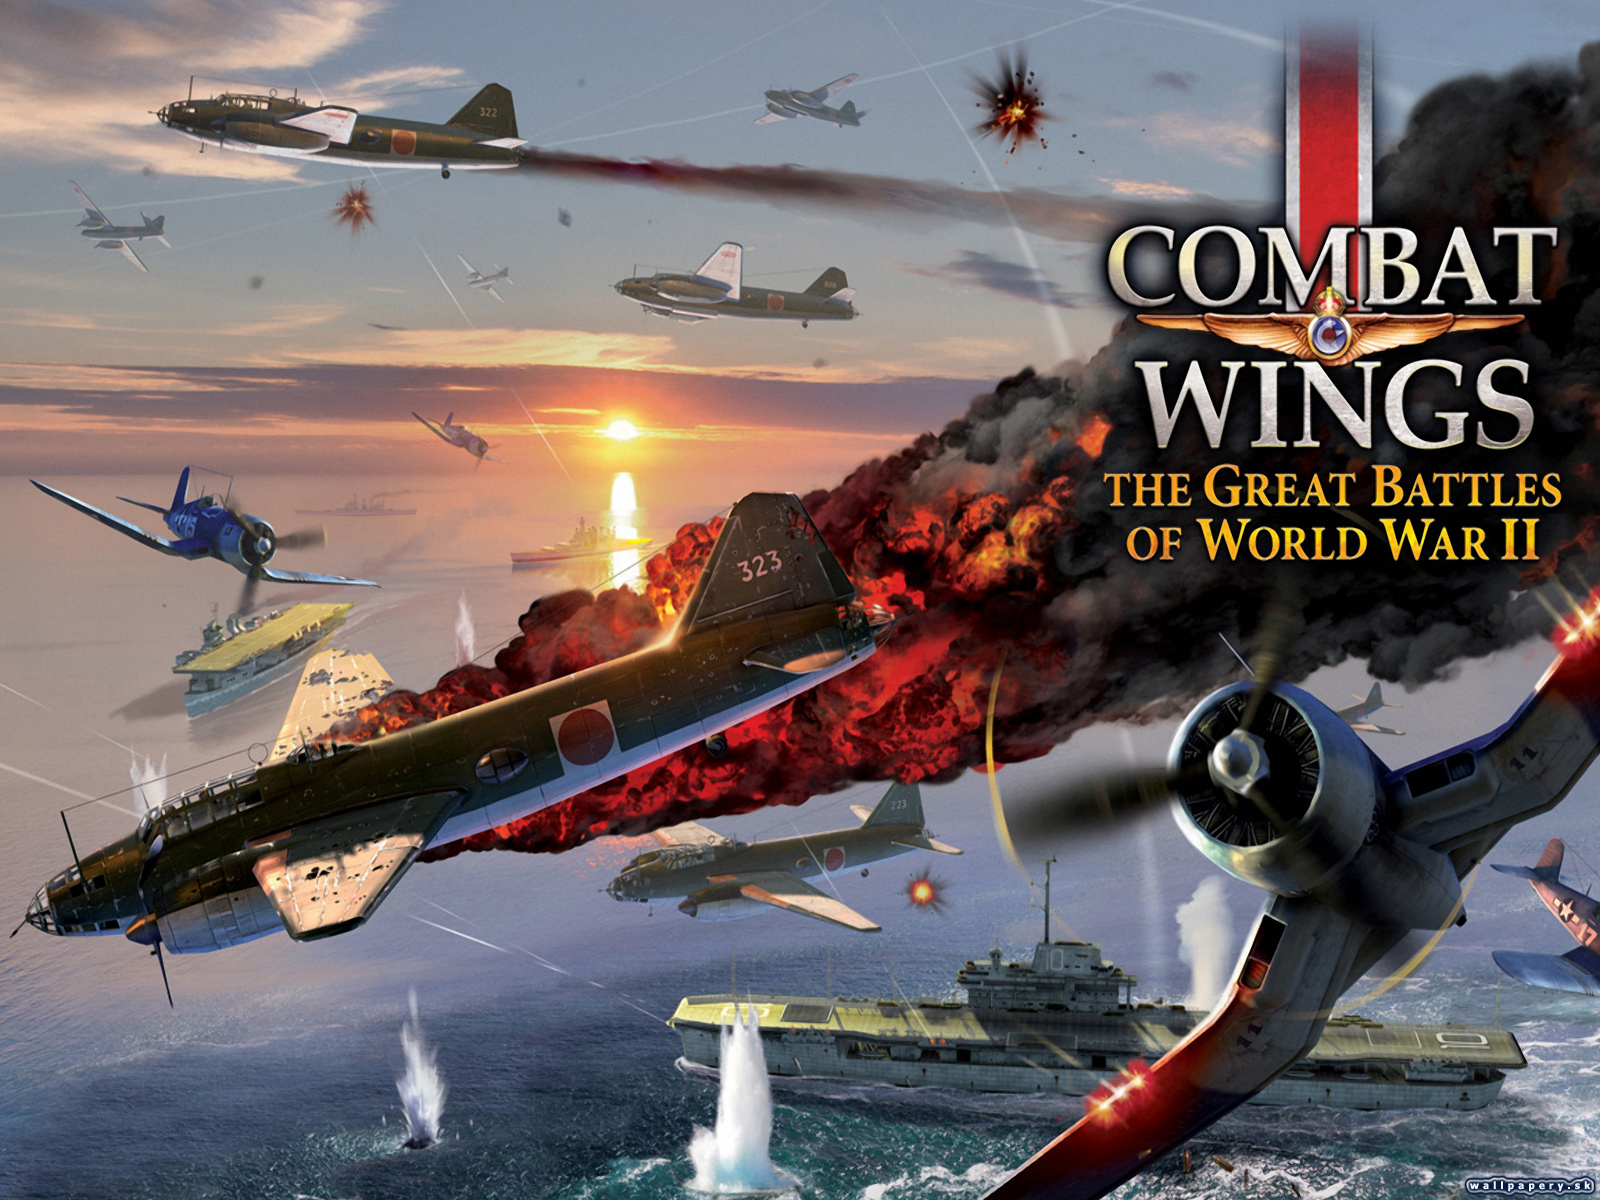 Combat Wings: The Great Battles of WWII - wallpaper 8